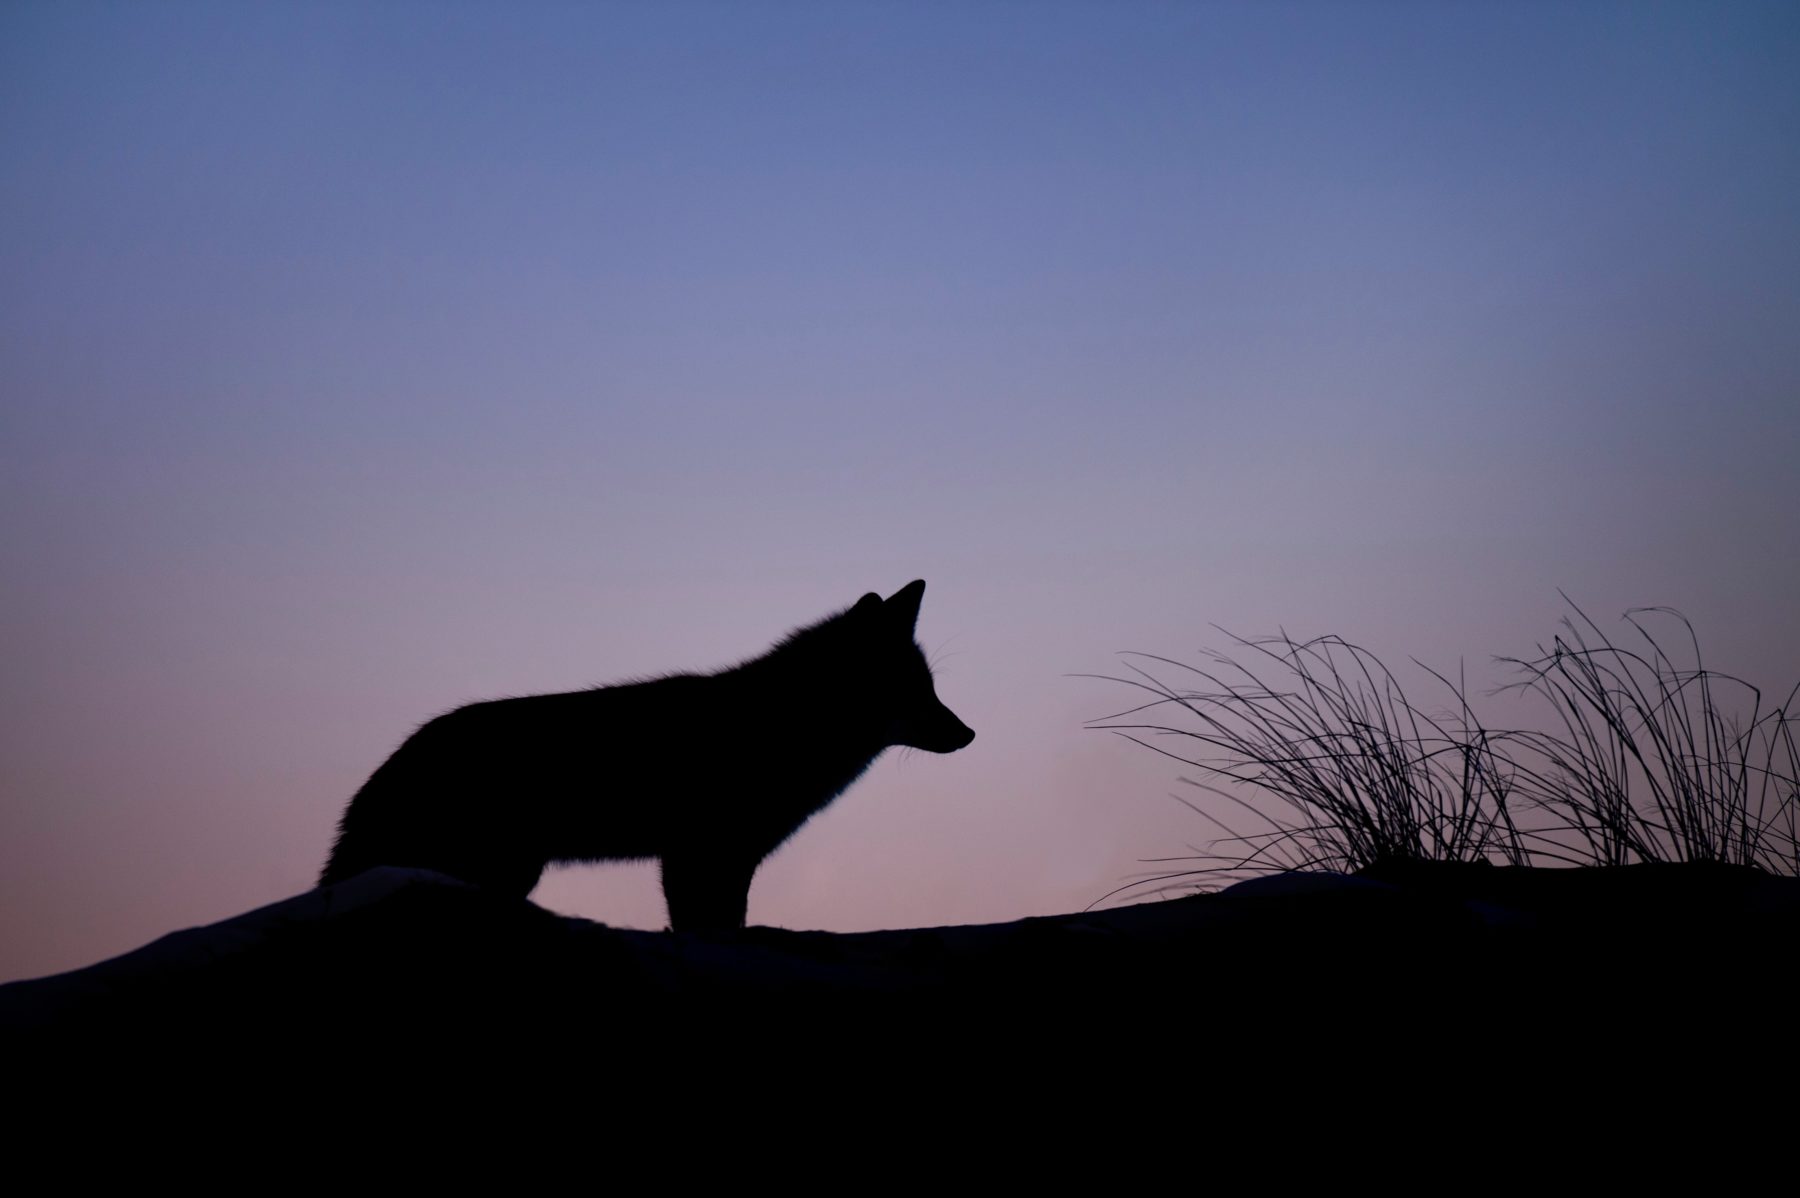 A silhouette of a fox in grassland during dusk.